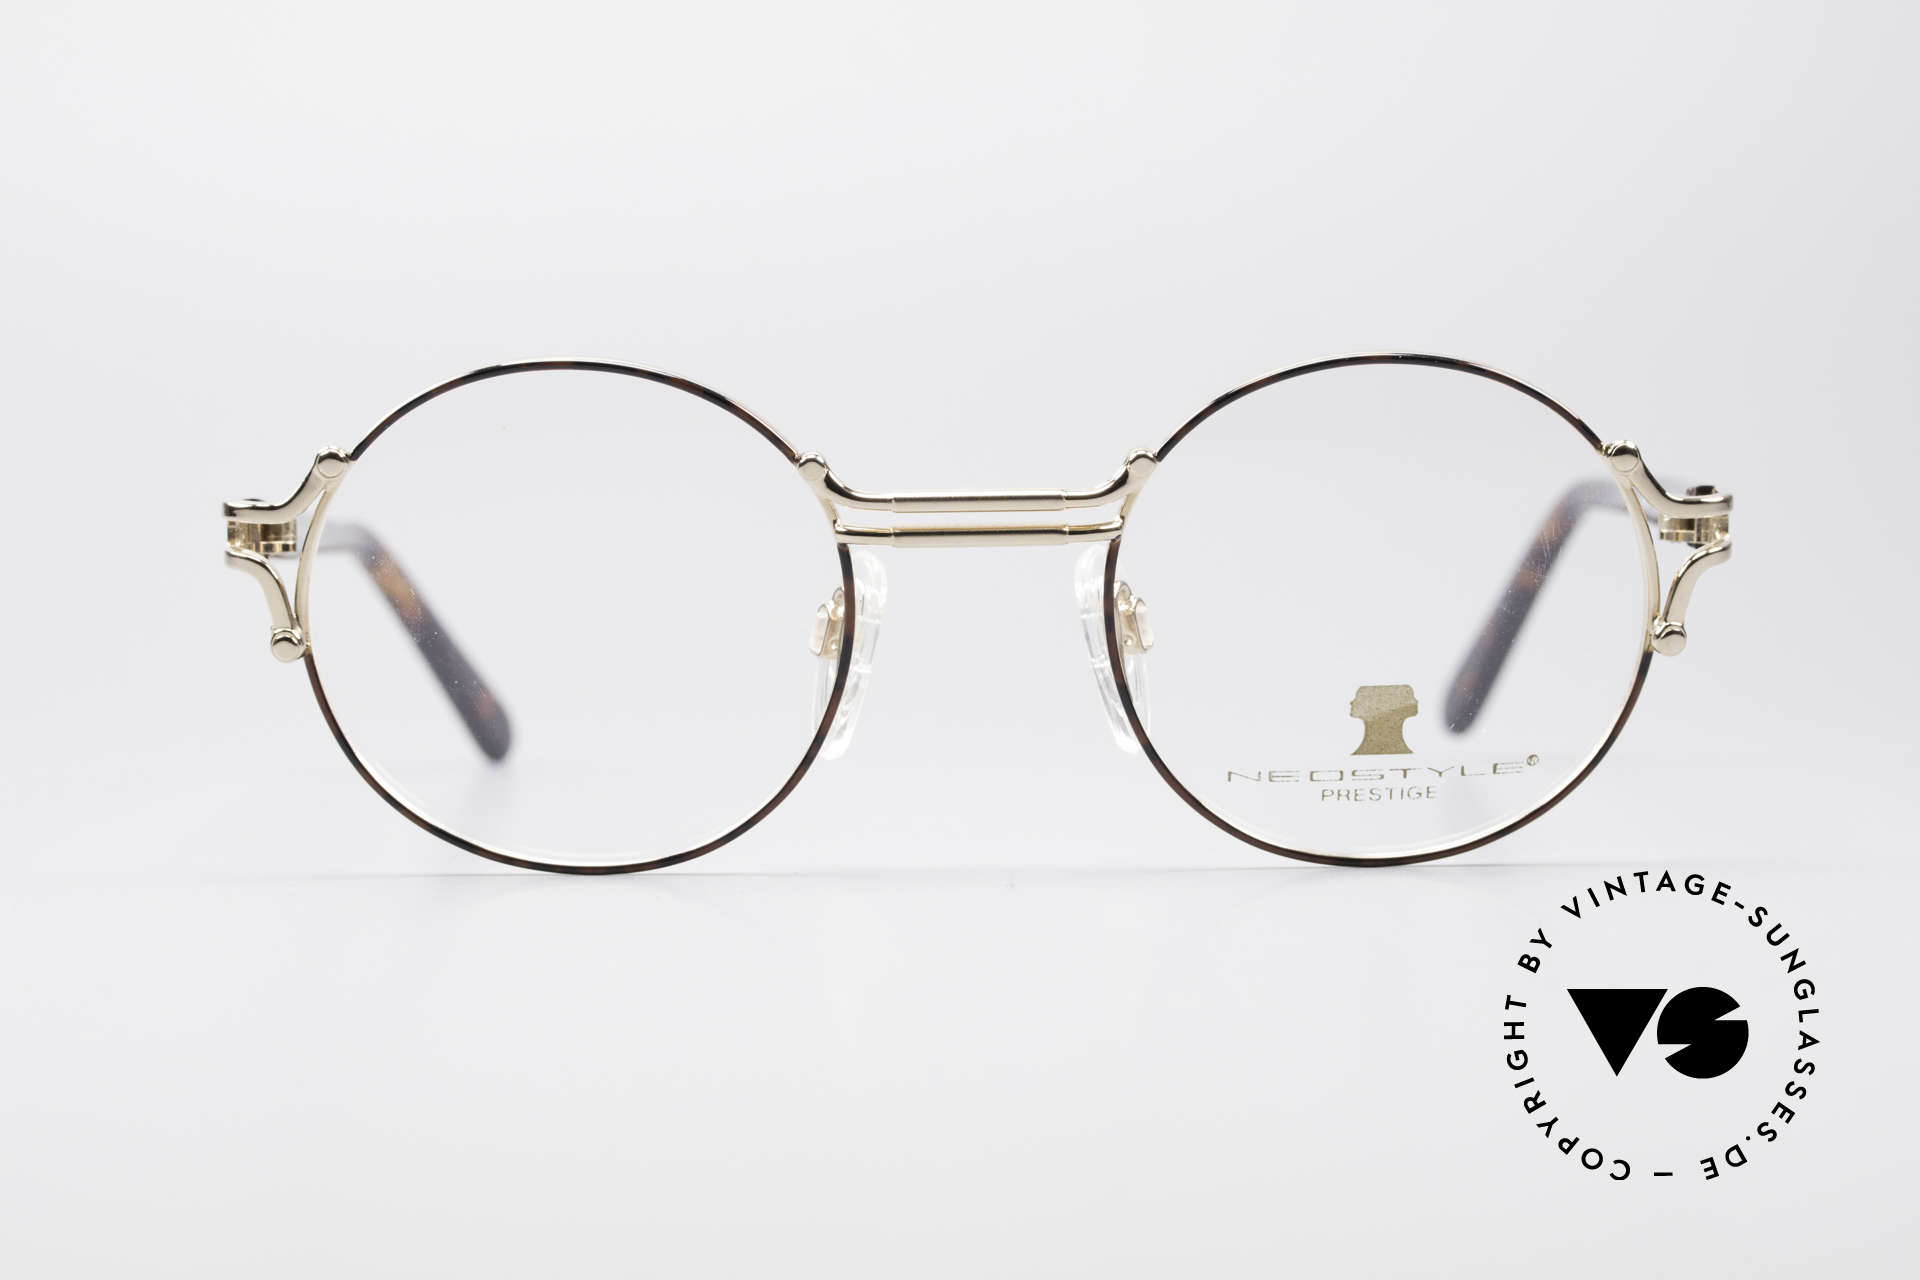 Neostyle Academic 8 Round Vintage Glasses 80's, round, timeless vintage eyeglasses of the 80's, Made for Men and Women